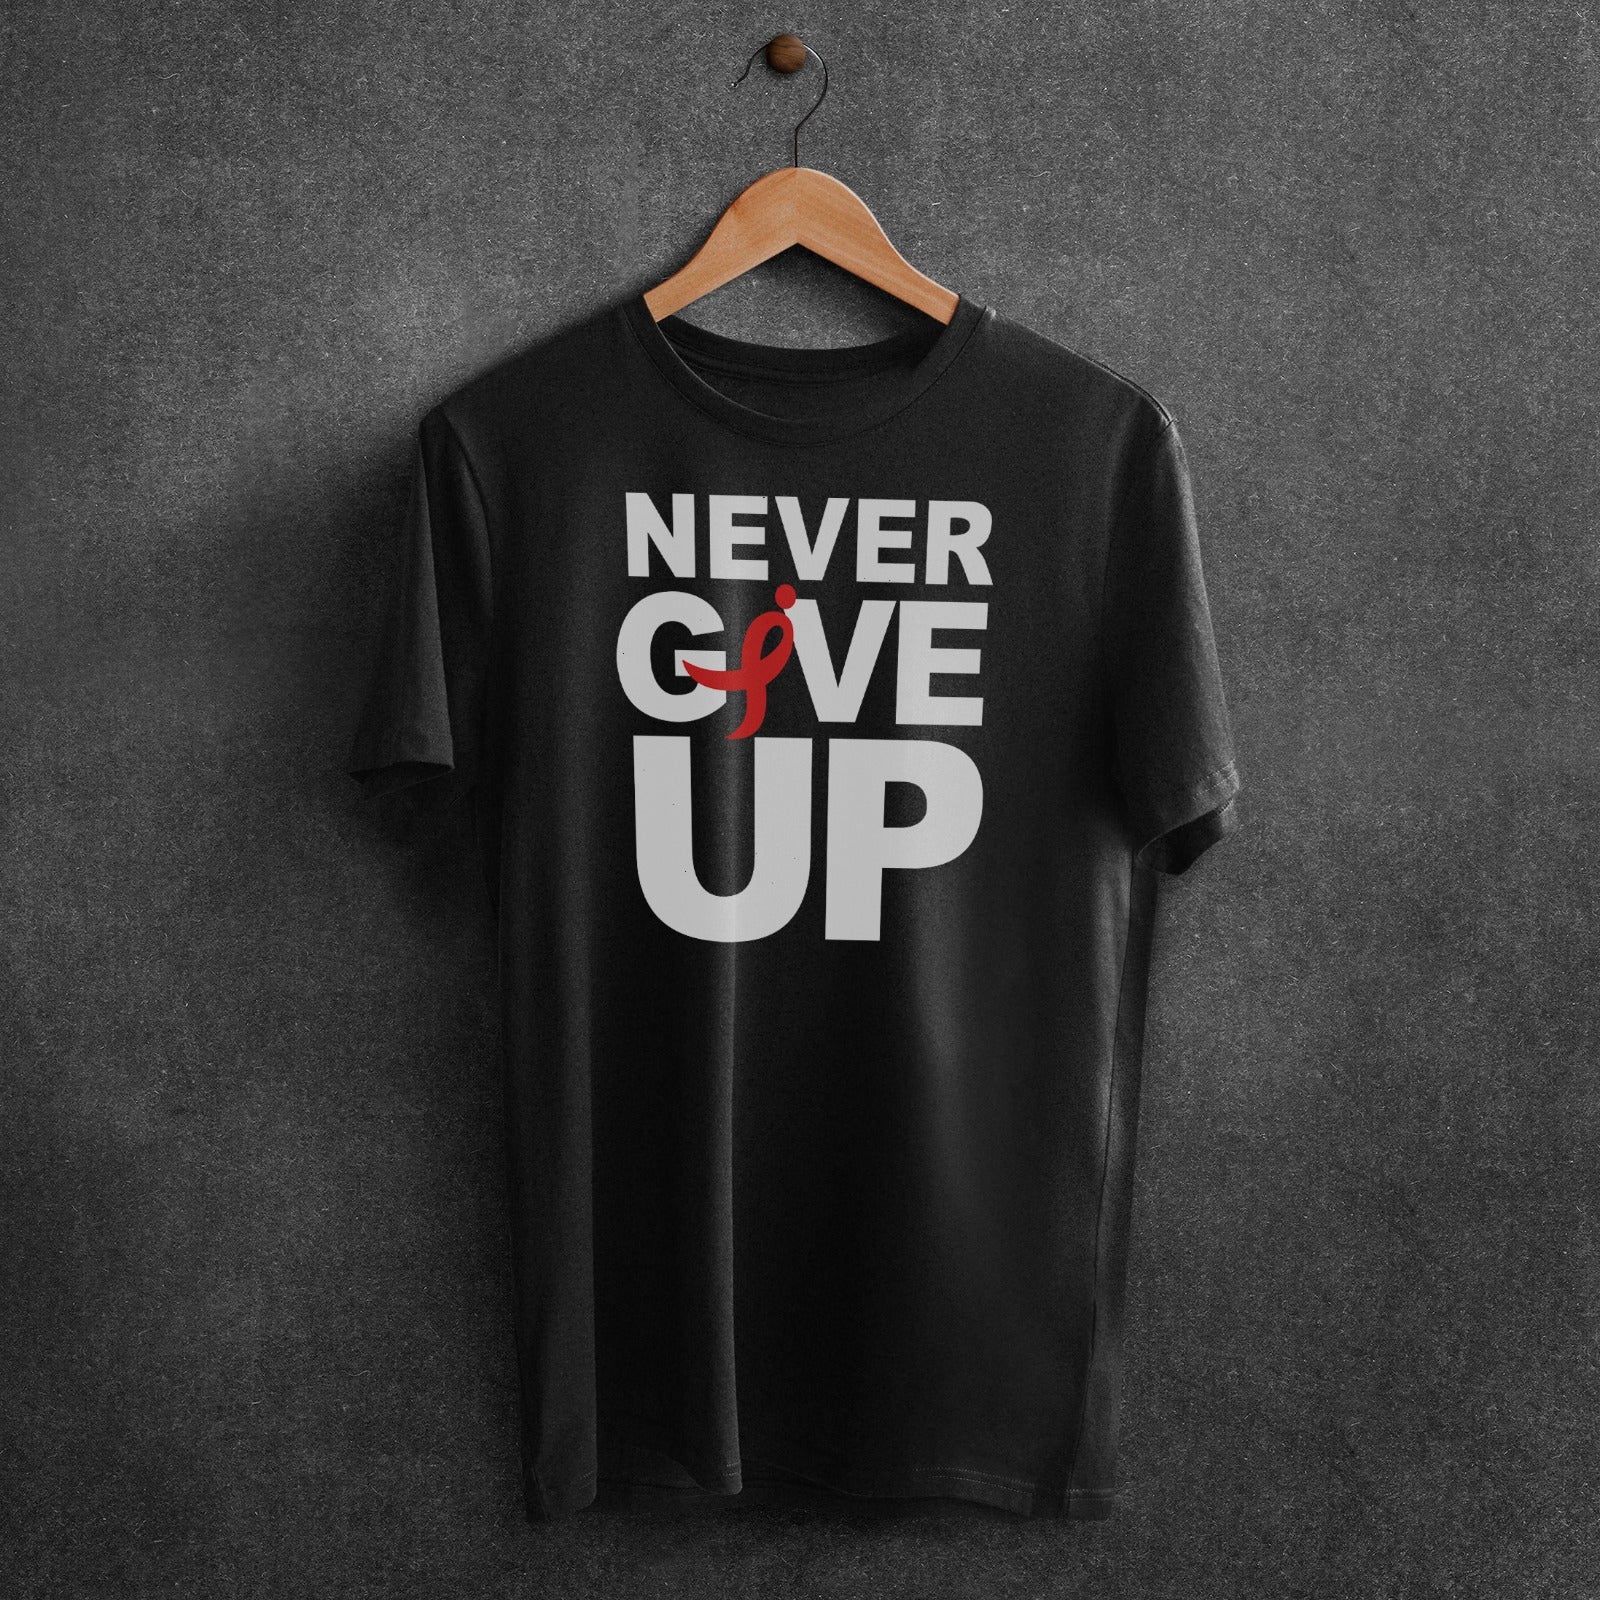 Never Give Up Slogan Graphic T-Shirt